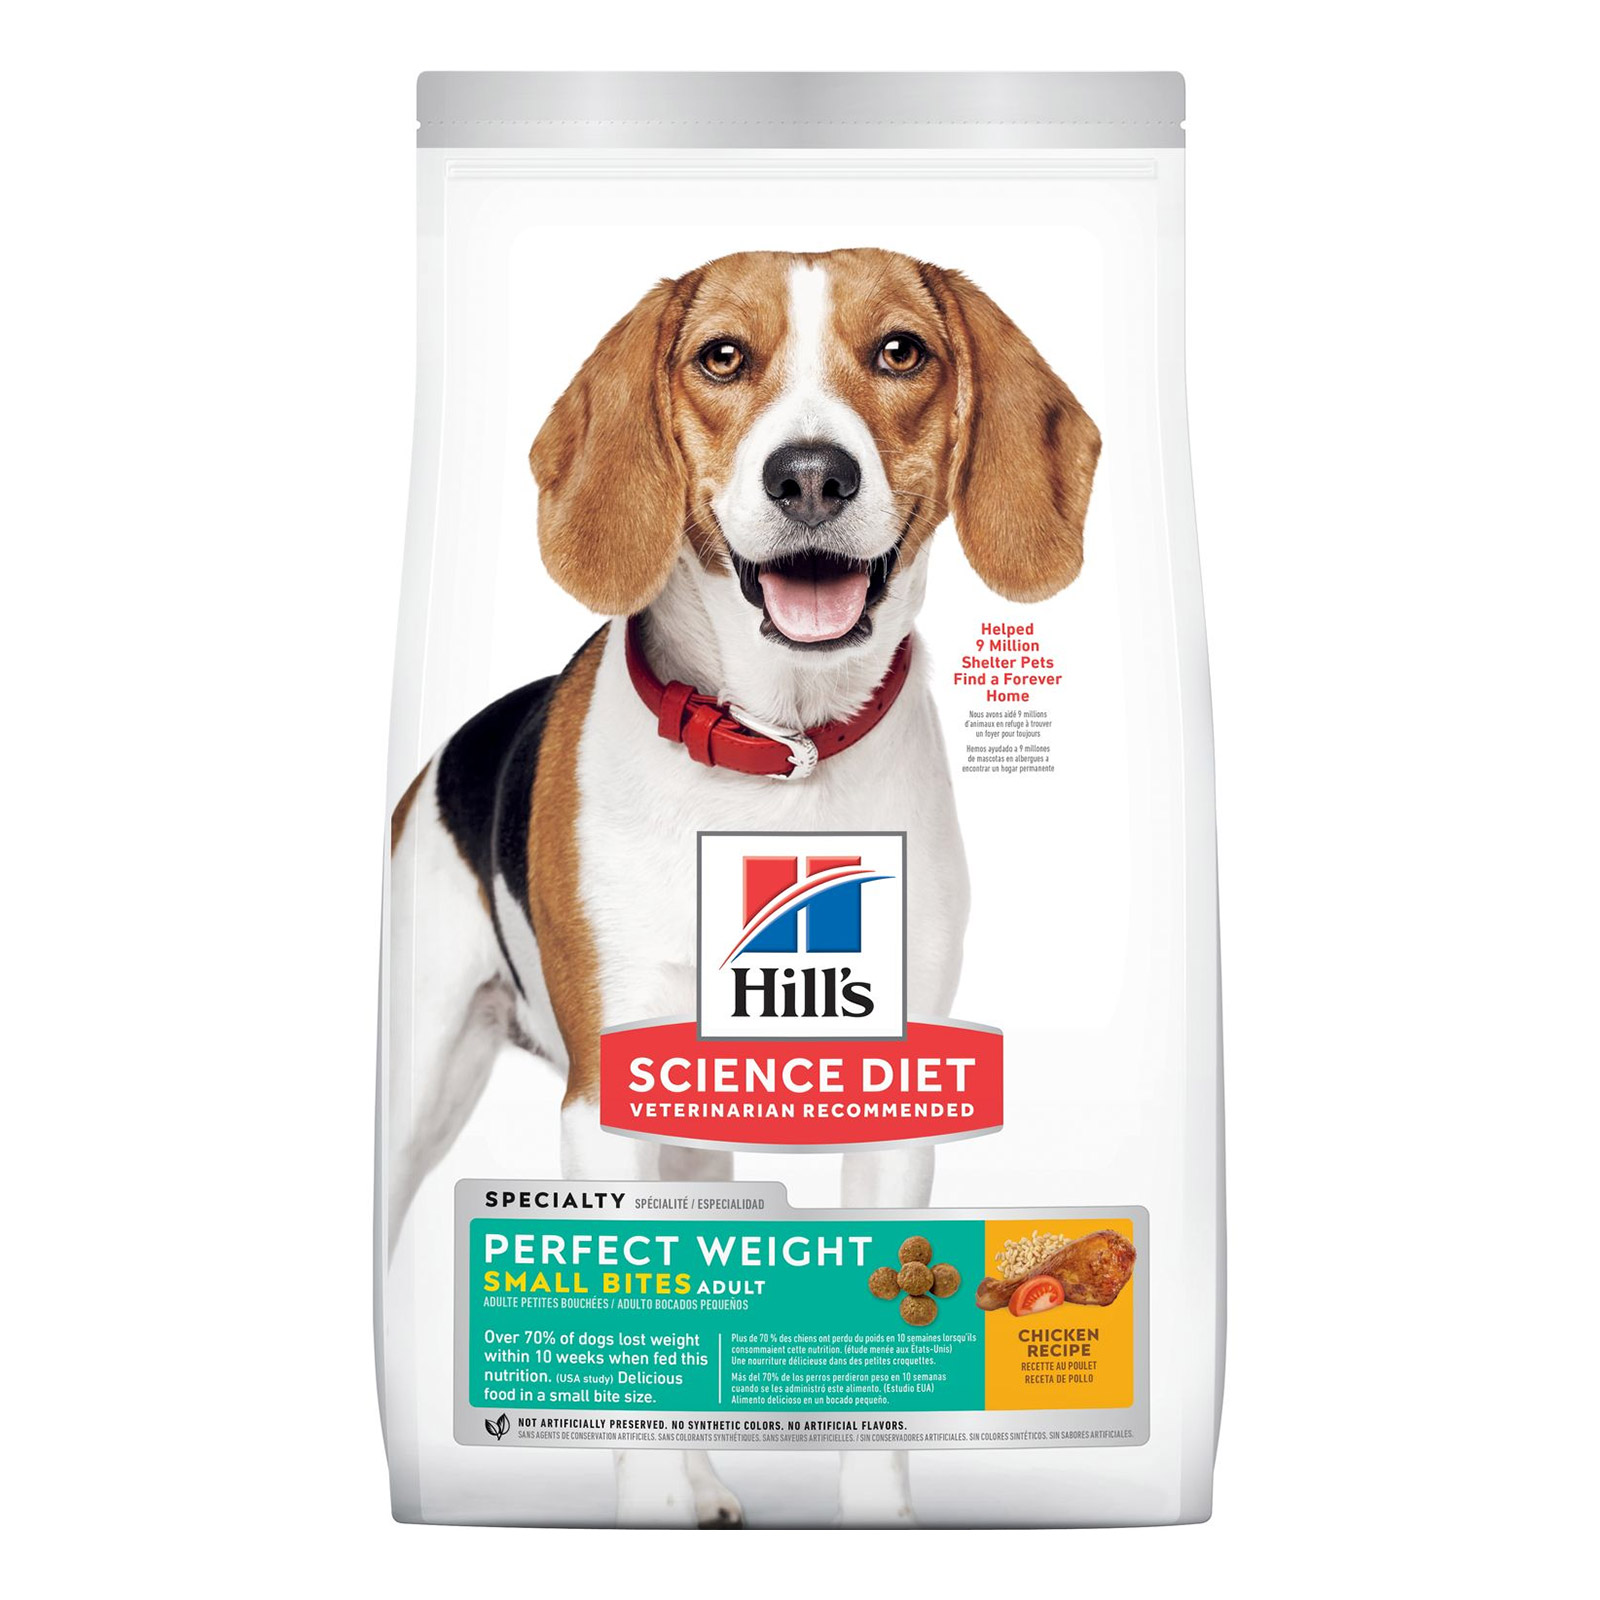 Hill's Science Diet Adult Perfect Weight Small Bites Dog Food for Food